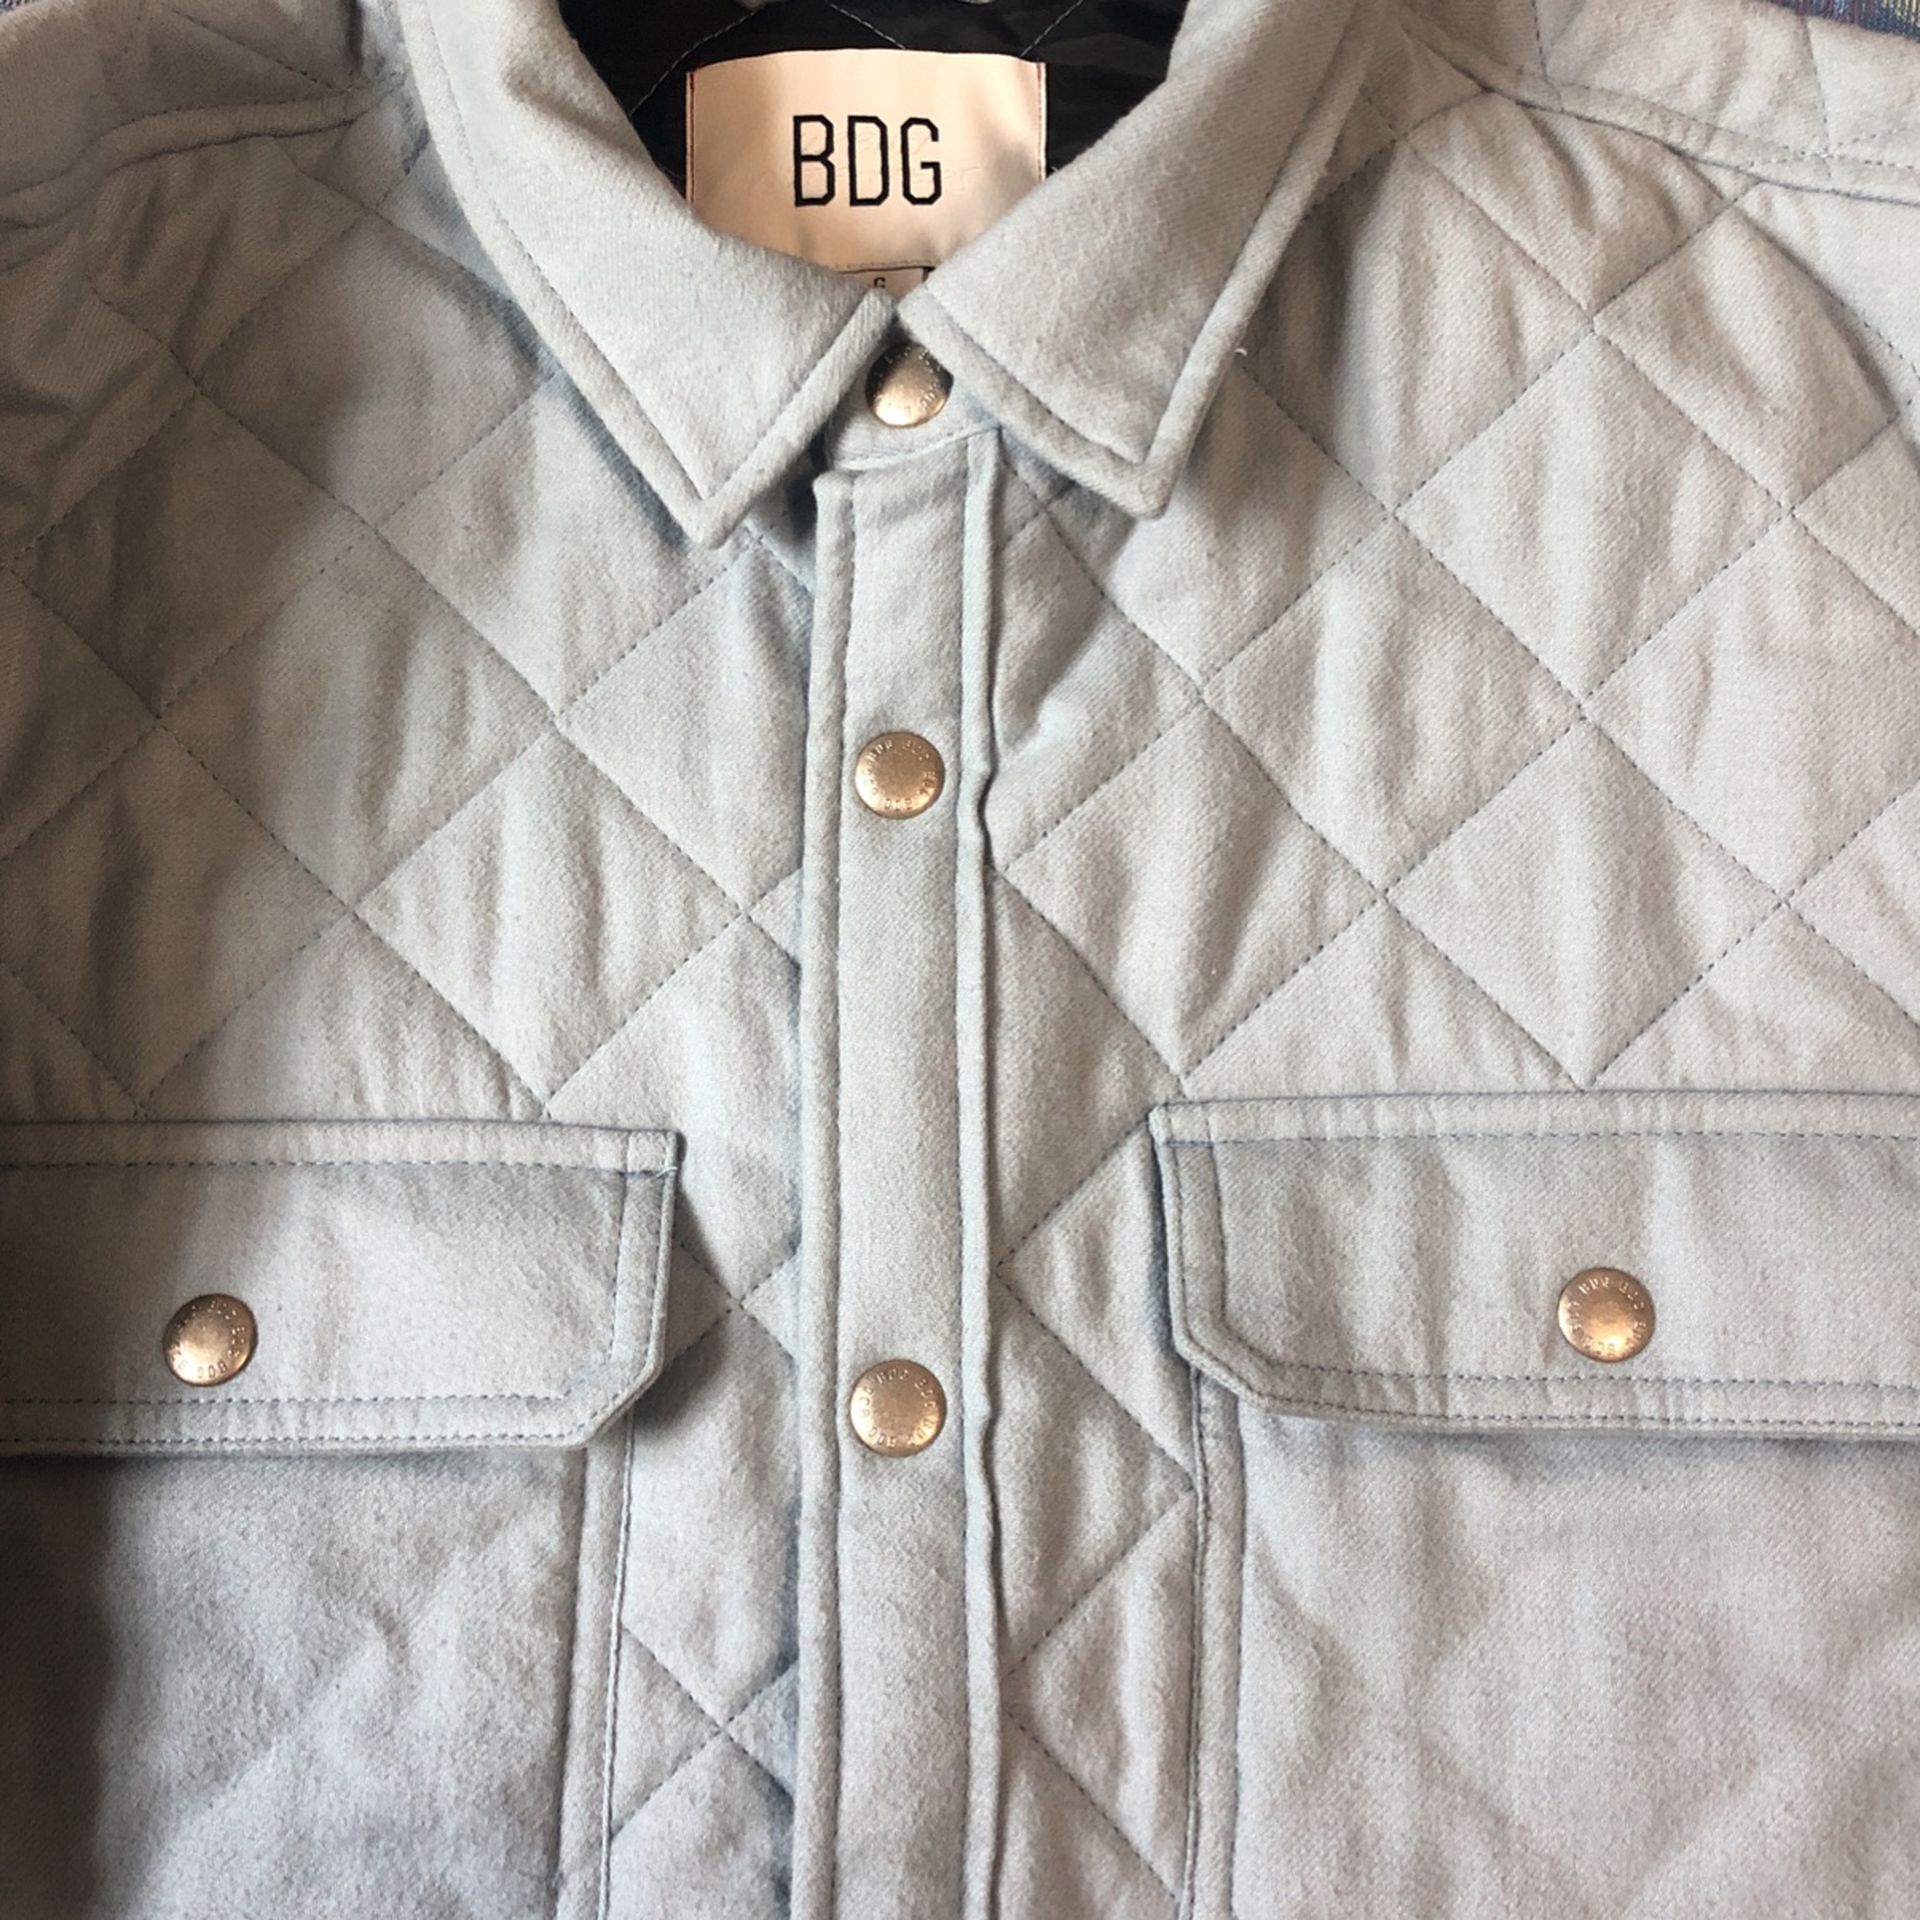 BDG Jacket Urban Outfitters 